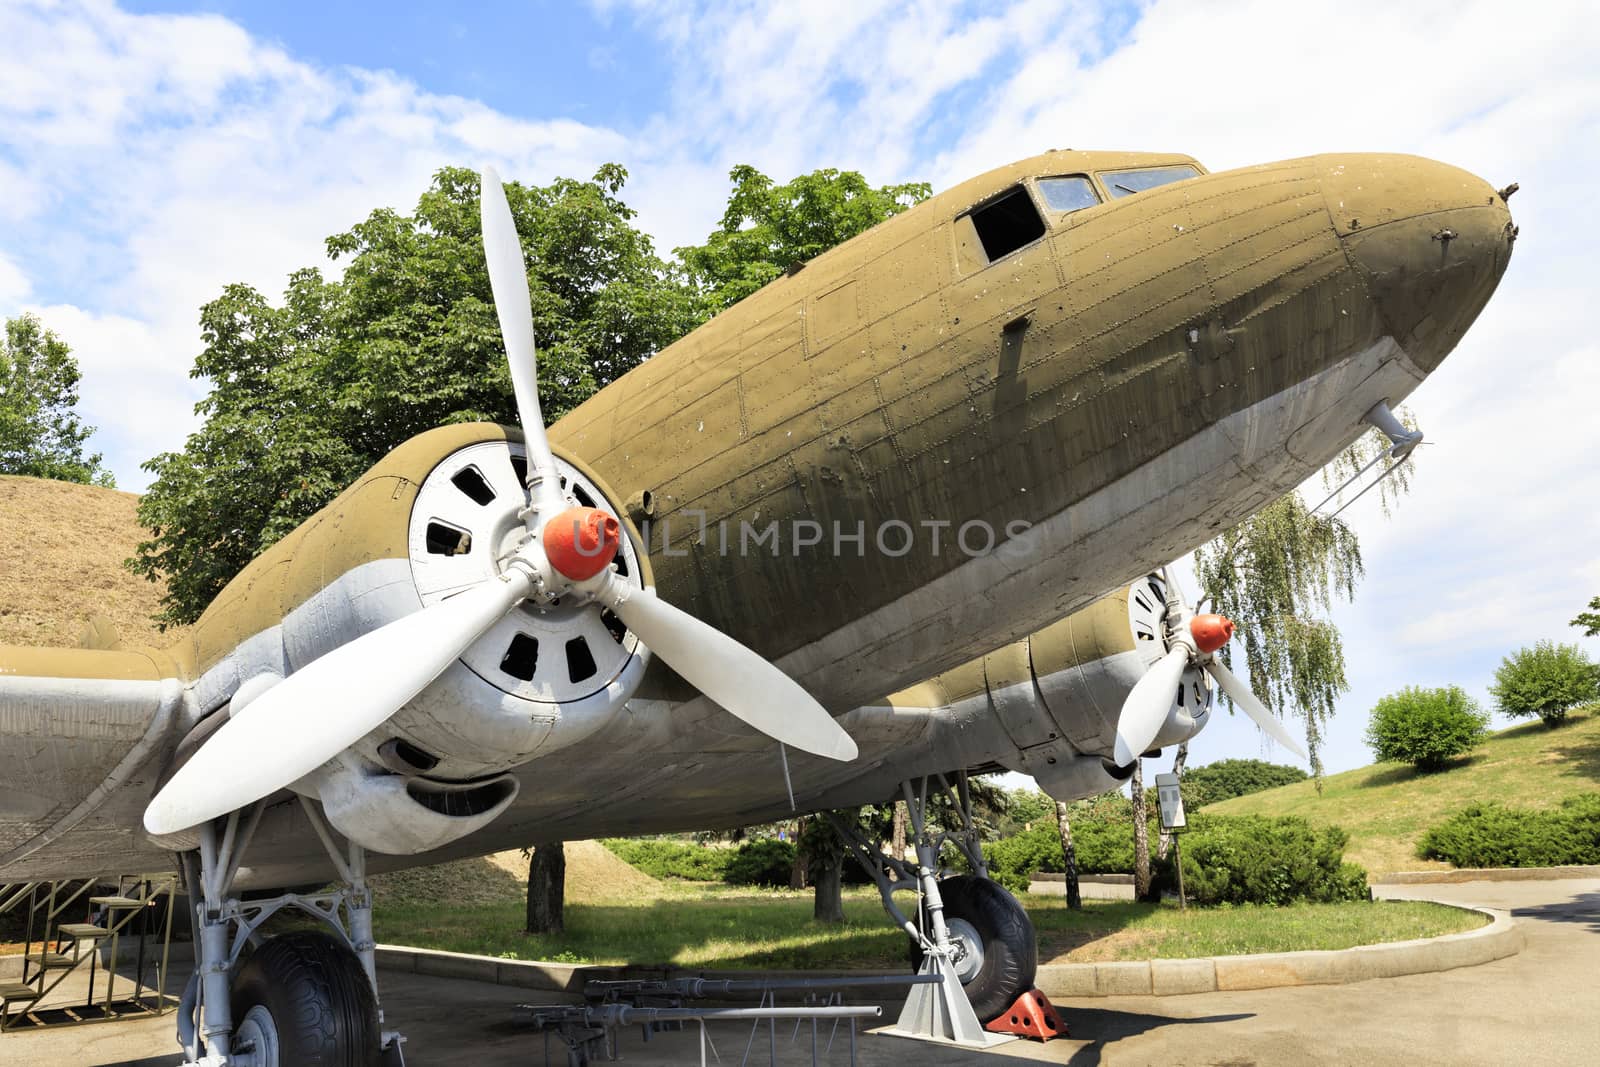 Old transport aircraft Li-2 of the Second World War. by Sergii